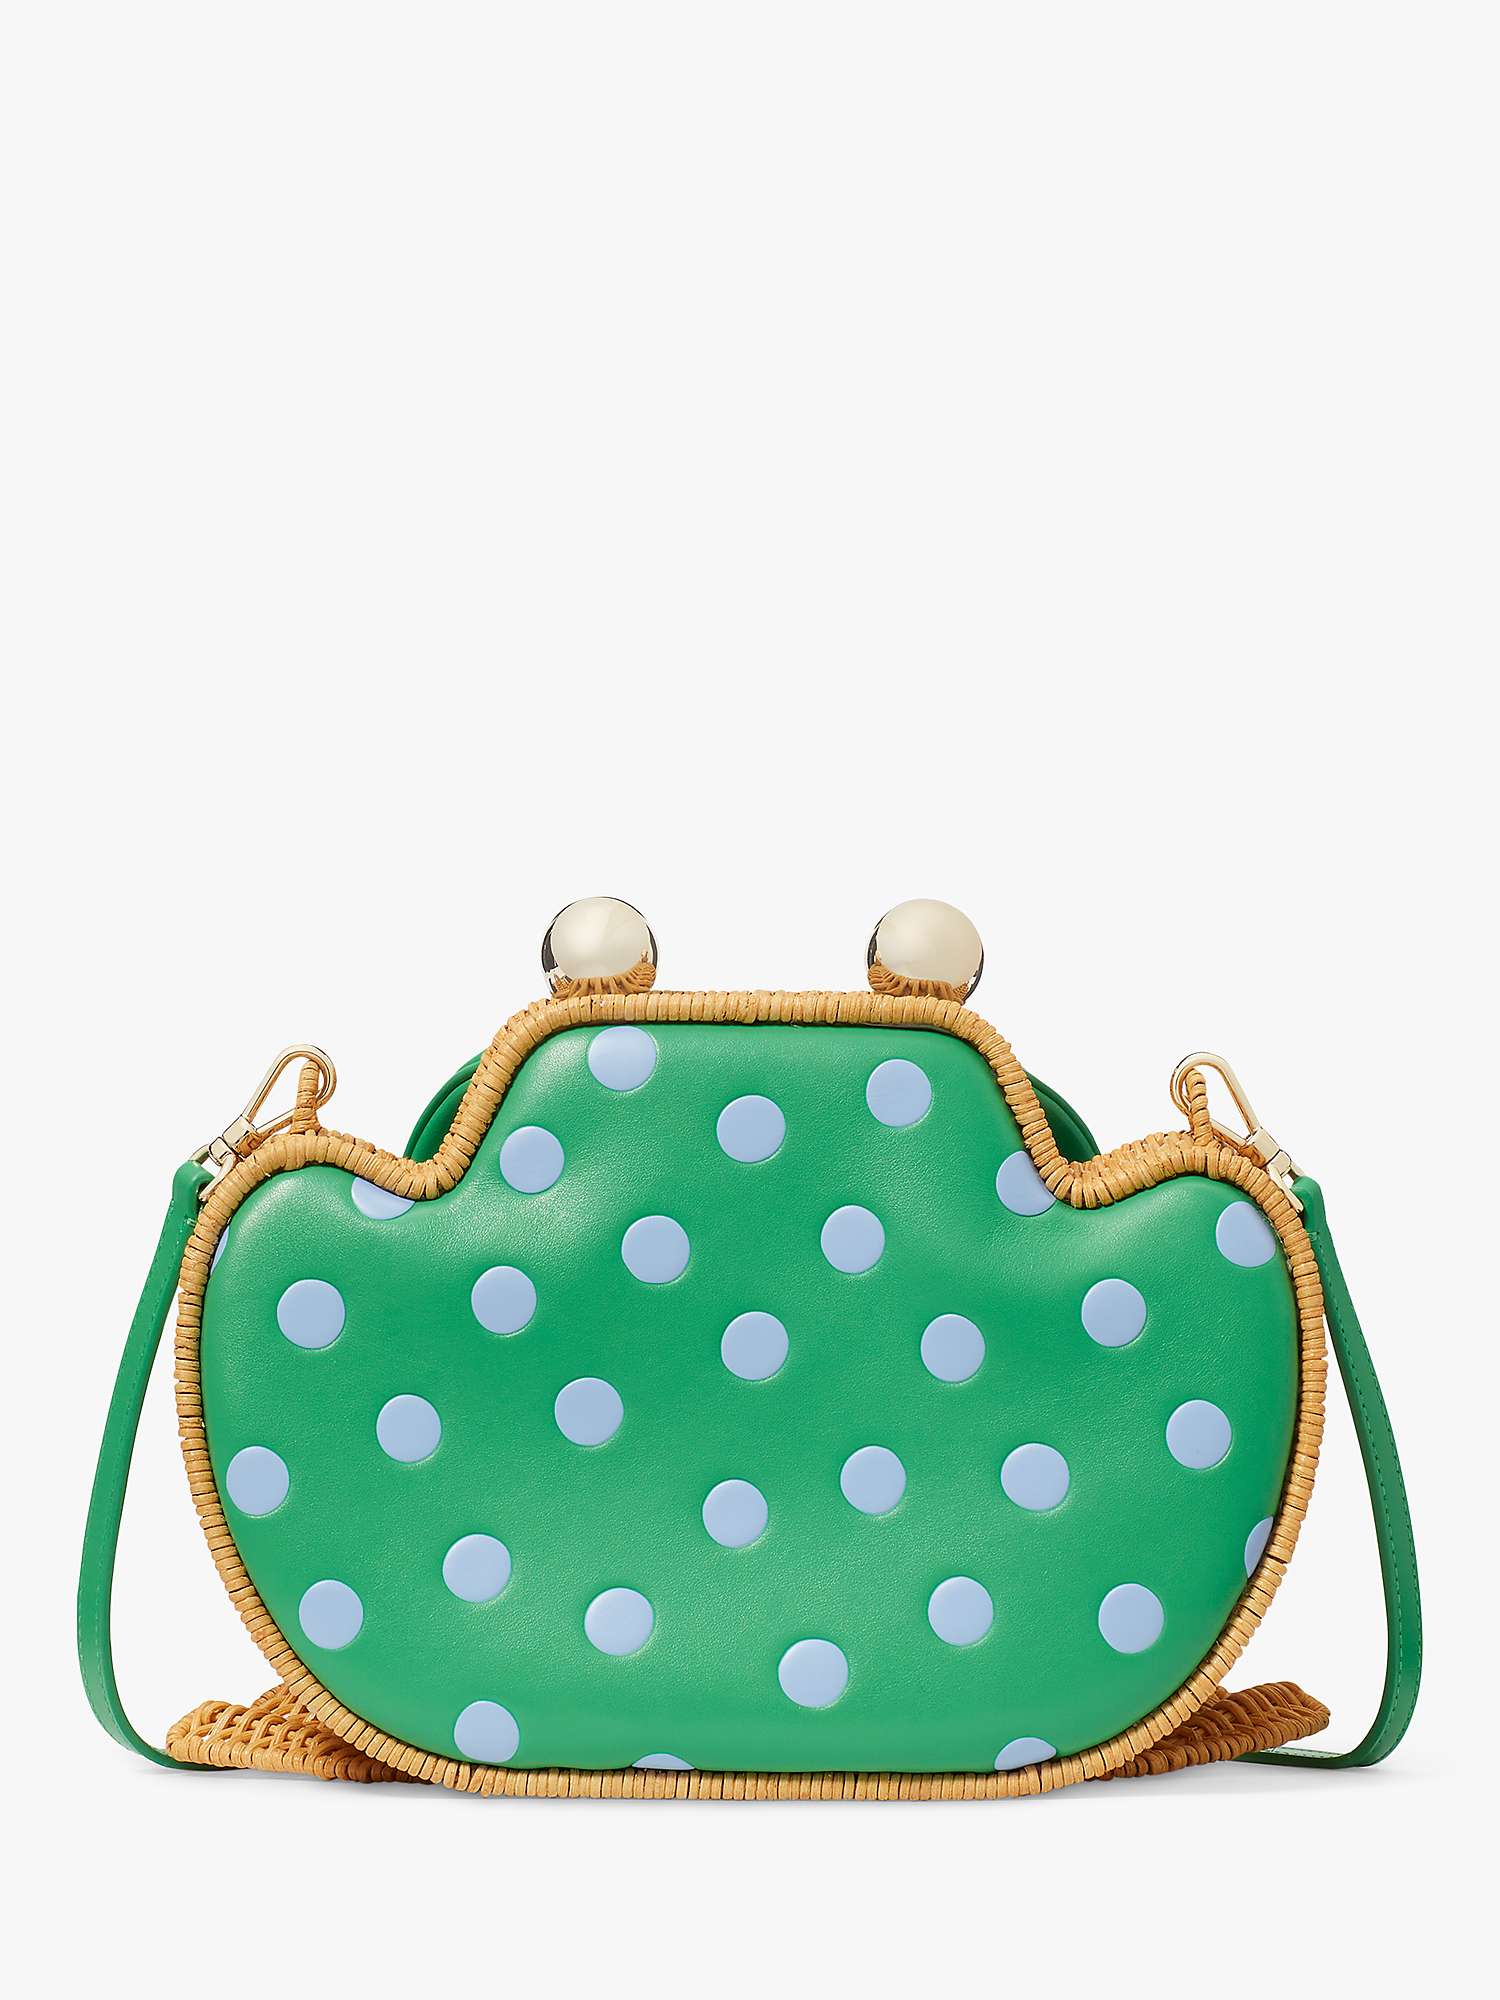 Buy kate spade new york Lily Frog Rattan Leather Blend Cross Body Bag, Candy Grass/Multi Online at johnlewis.com